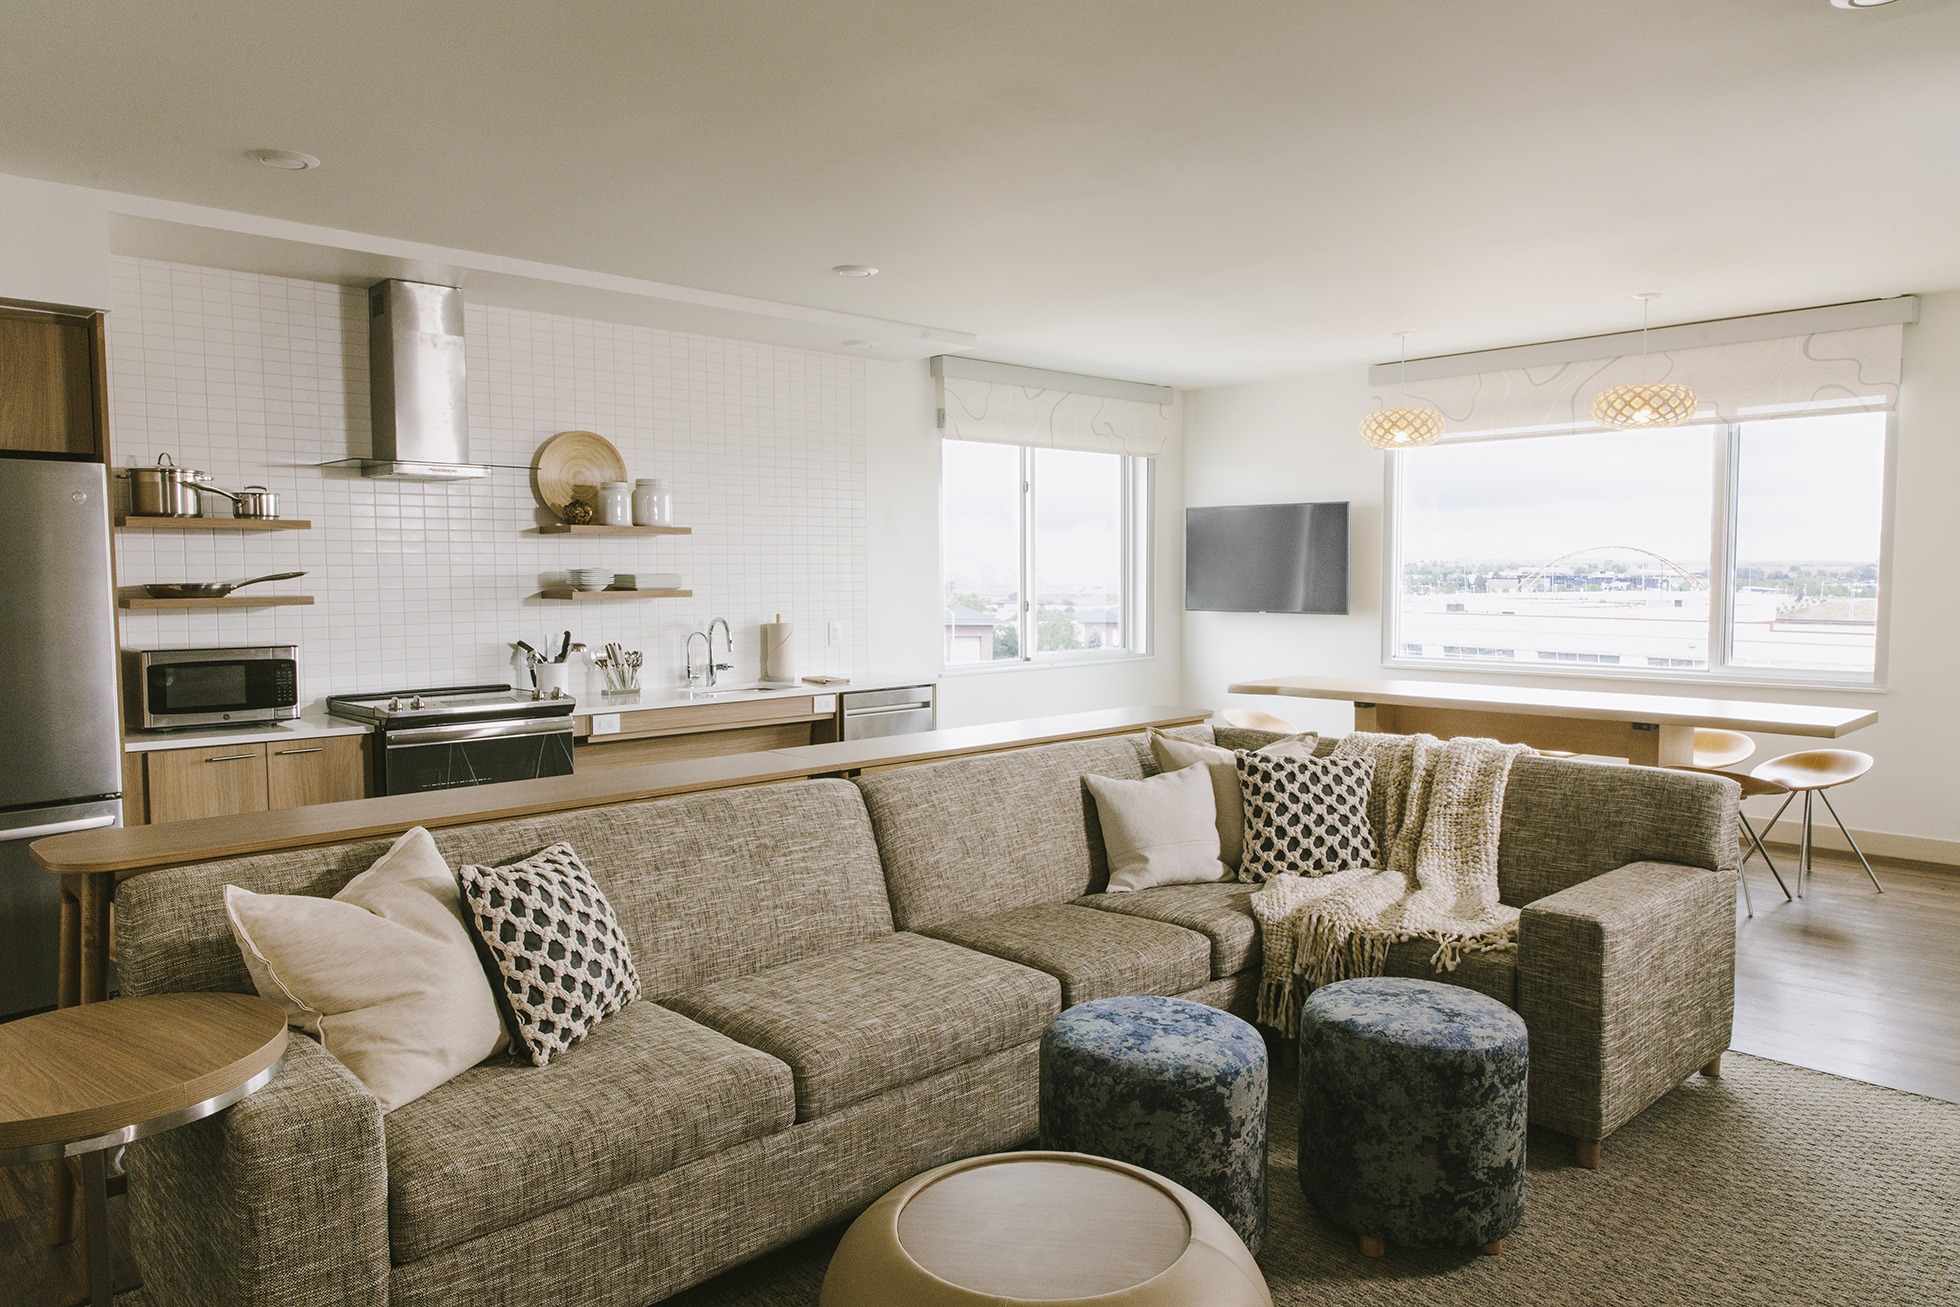 A living room in an Element by Westin hotel. A tan couch with earth-tone pillows is in front of a kitchen with white subway tiles.